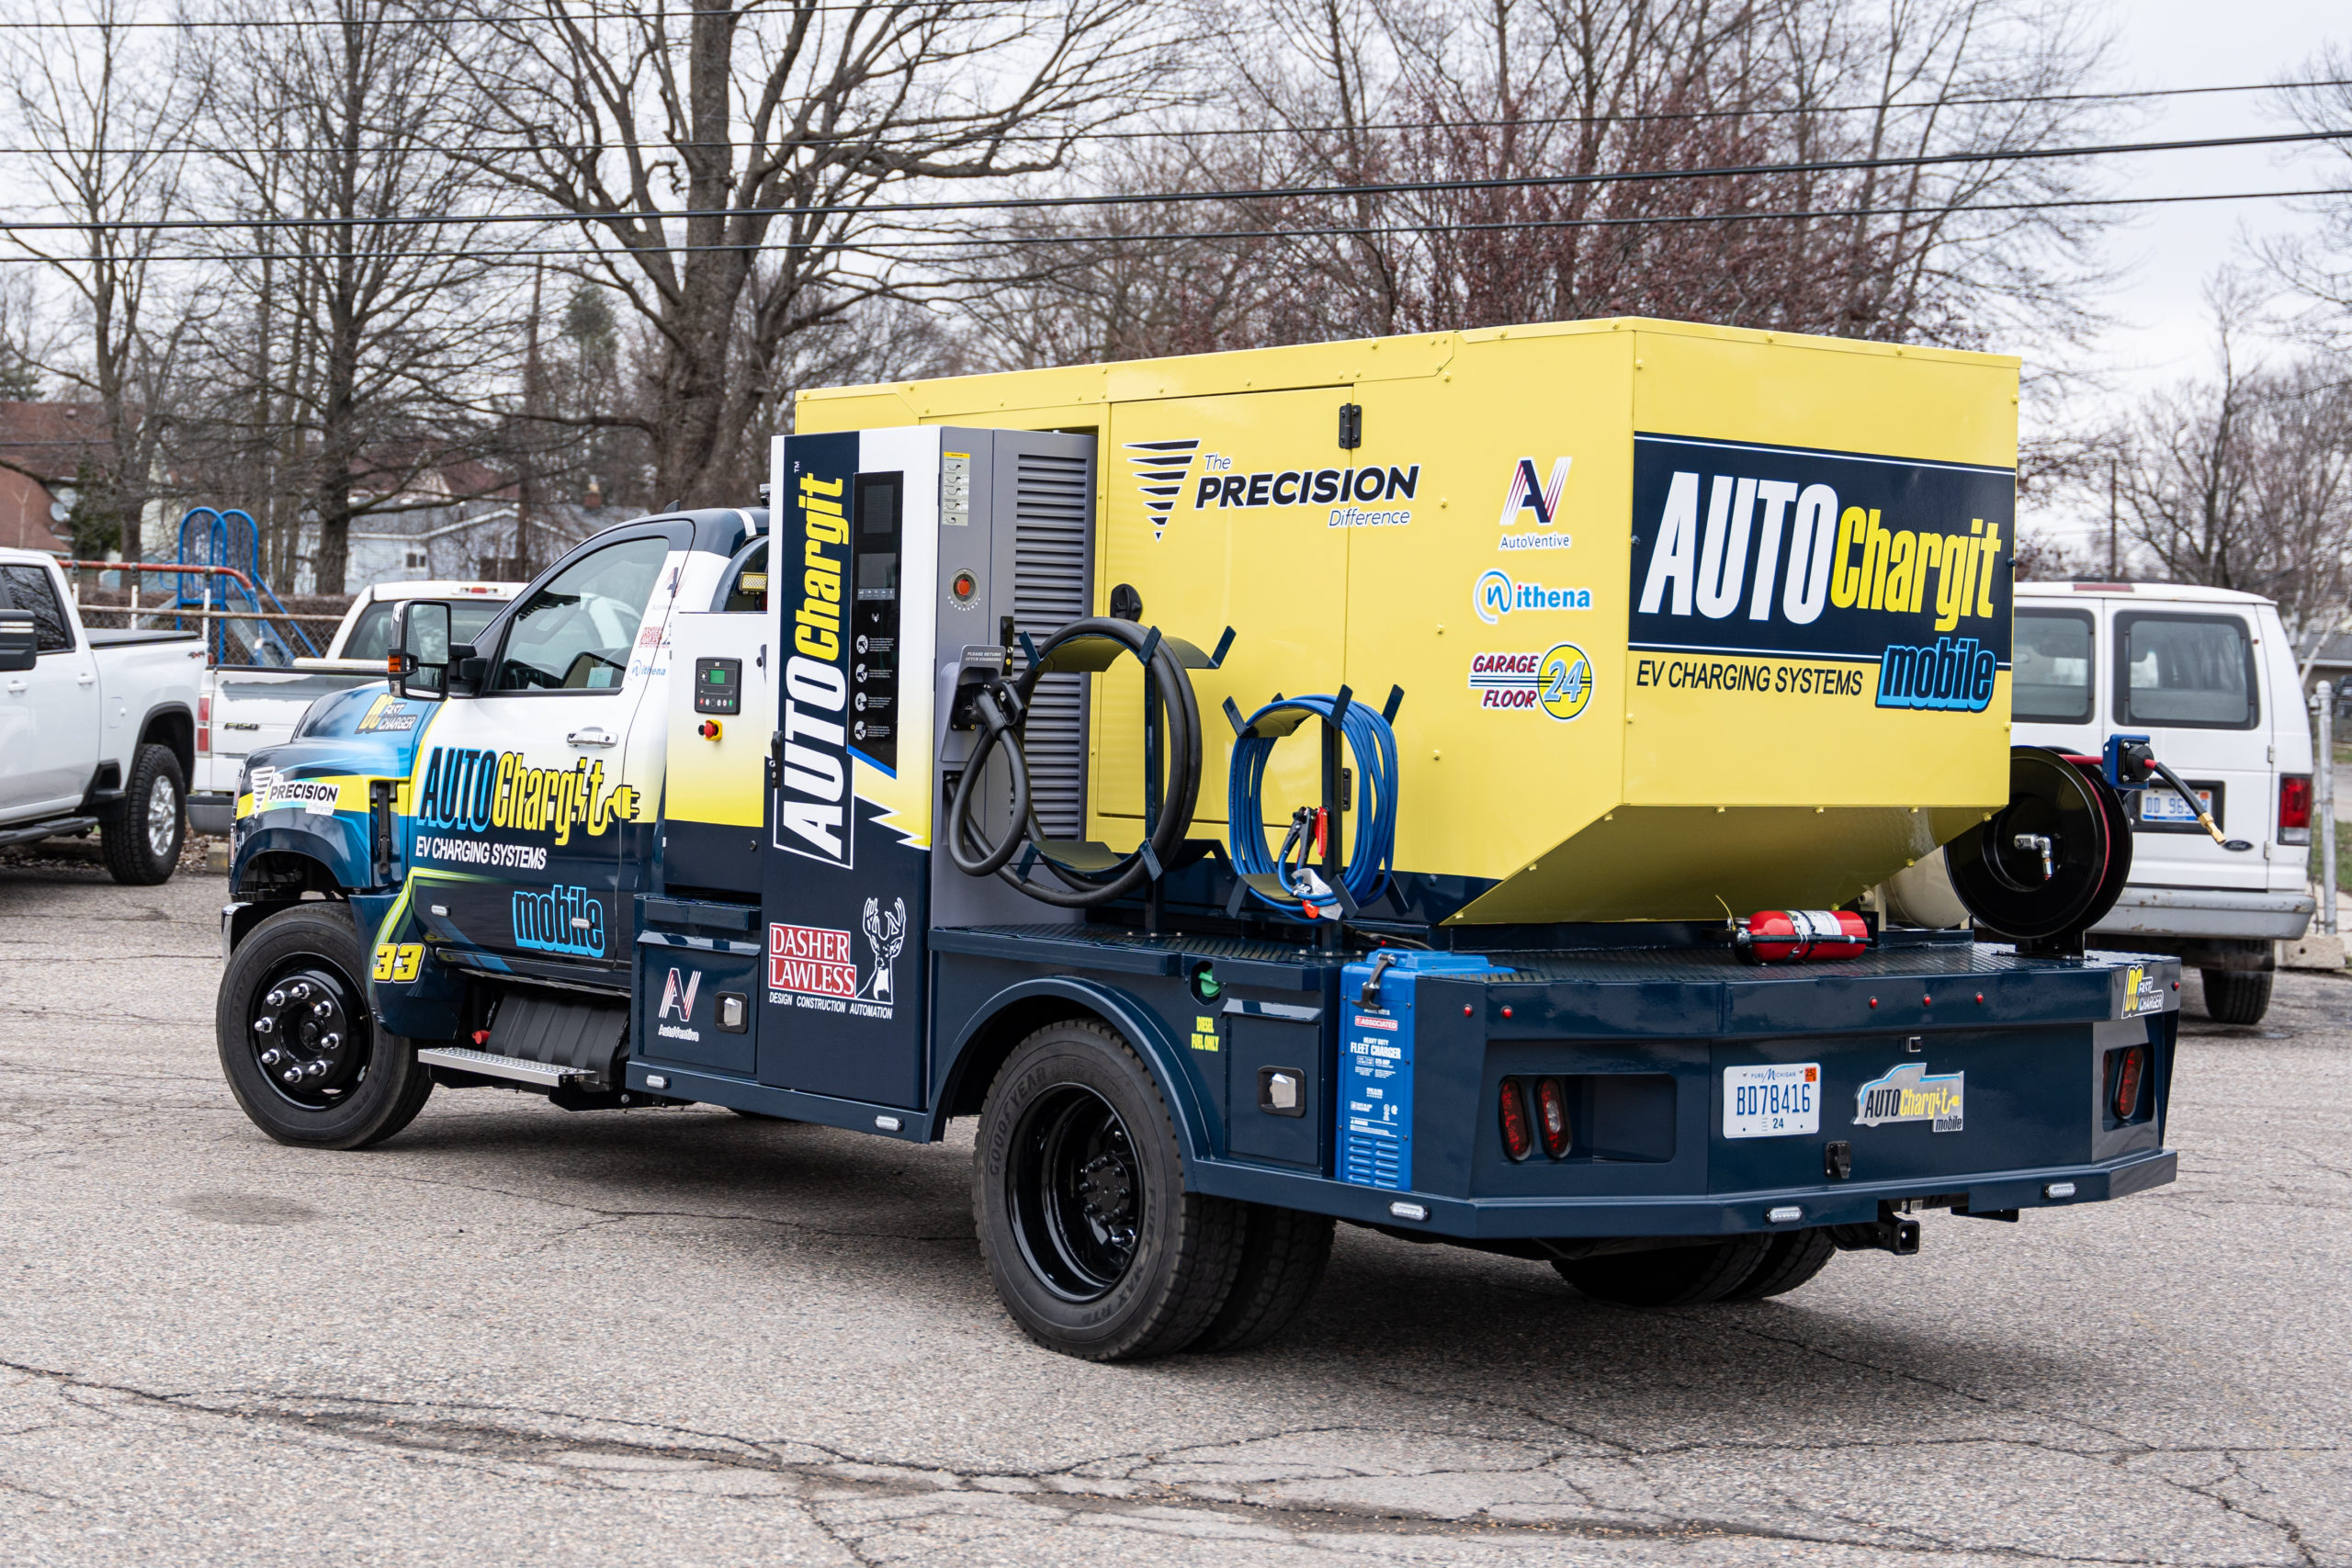 The AUTOChargit Mobile Truck Equipped with a 120 kW L3(DCFC) Charger and 175kW Generator.